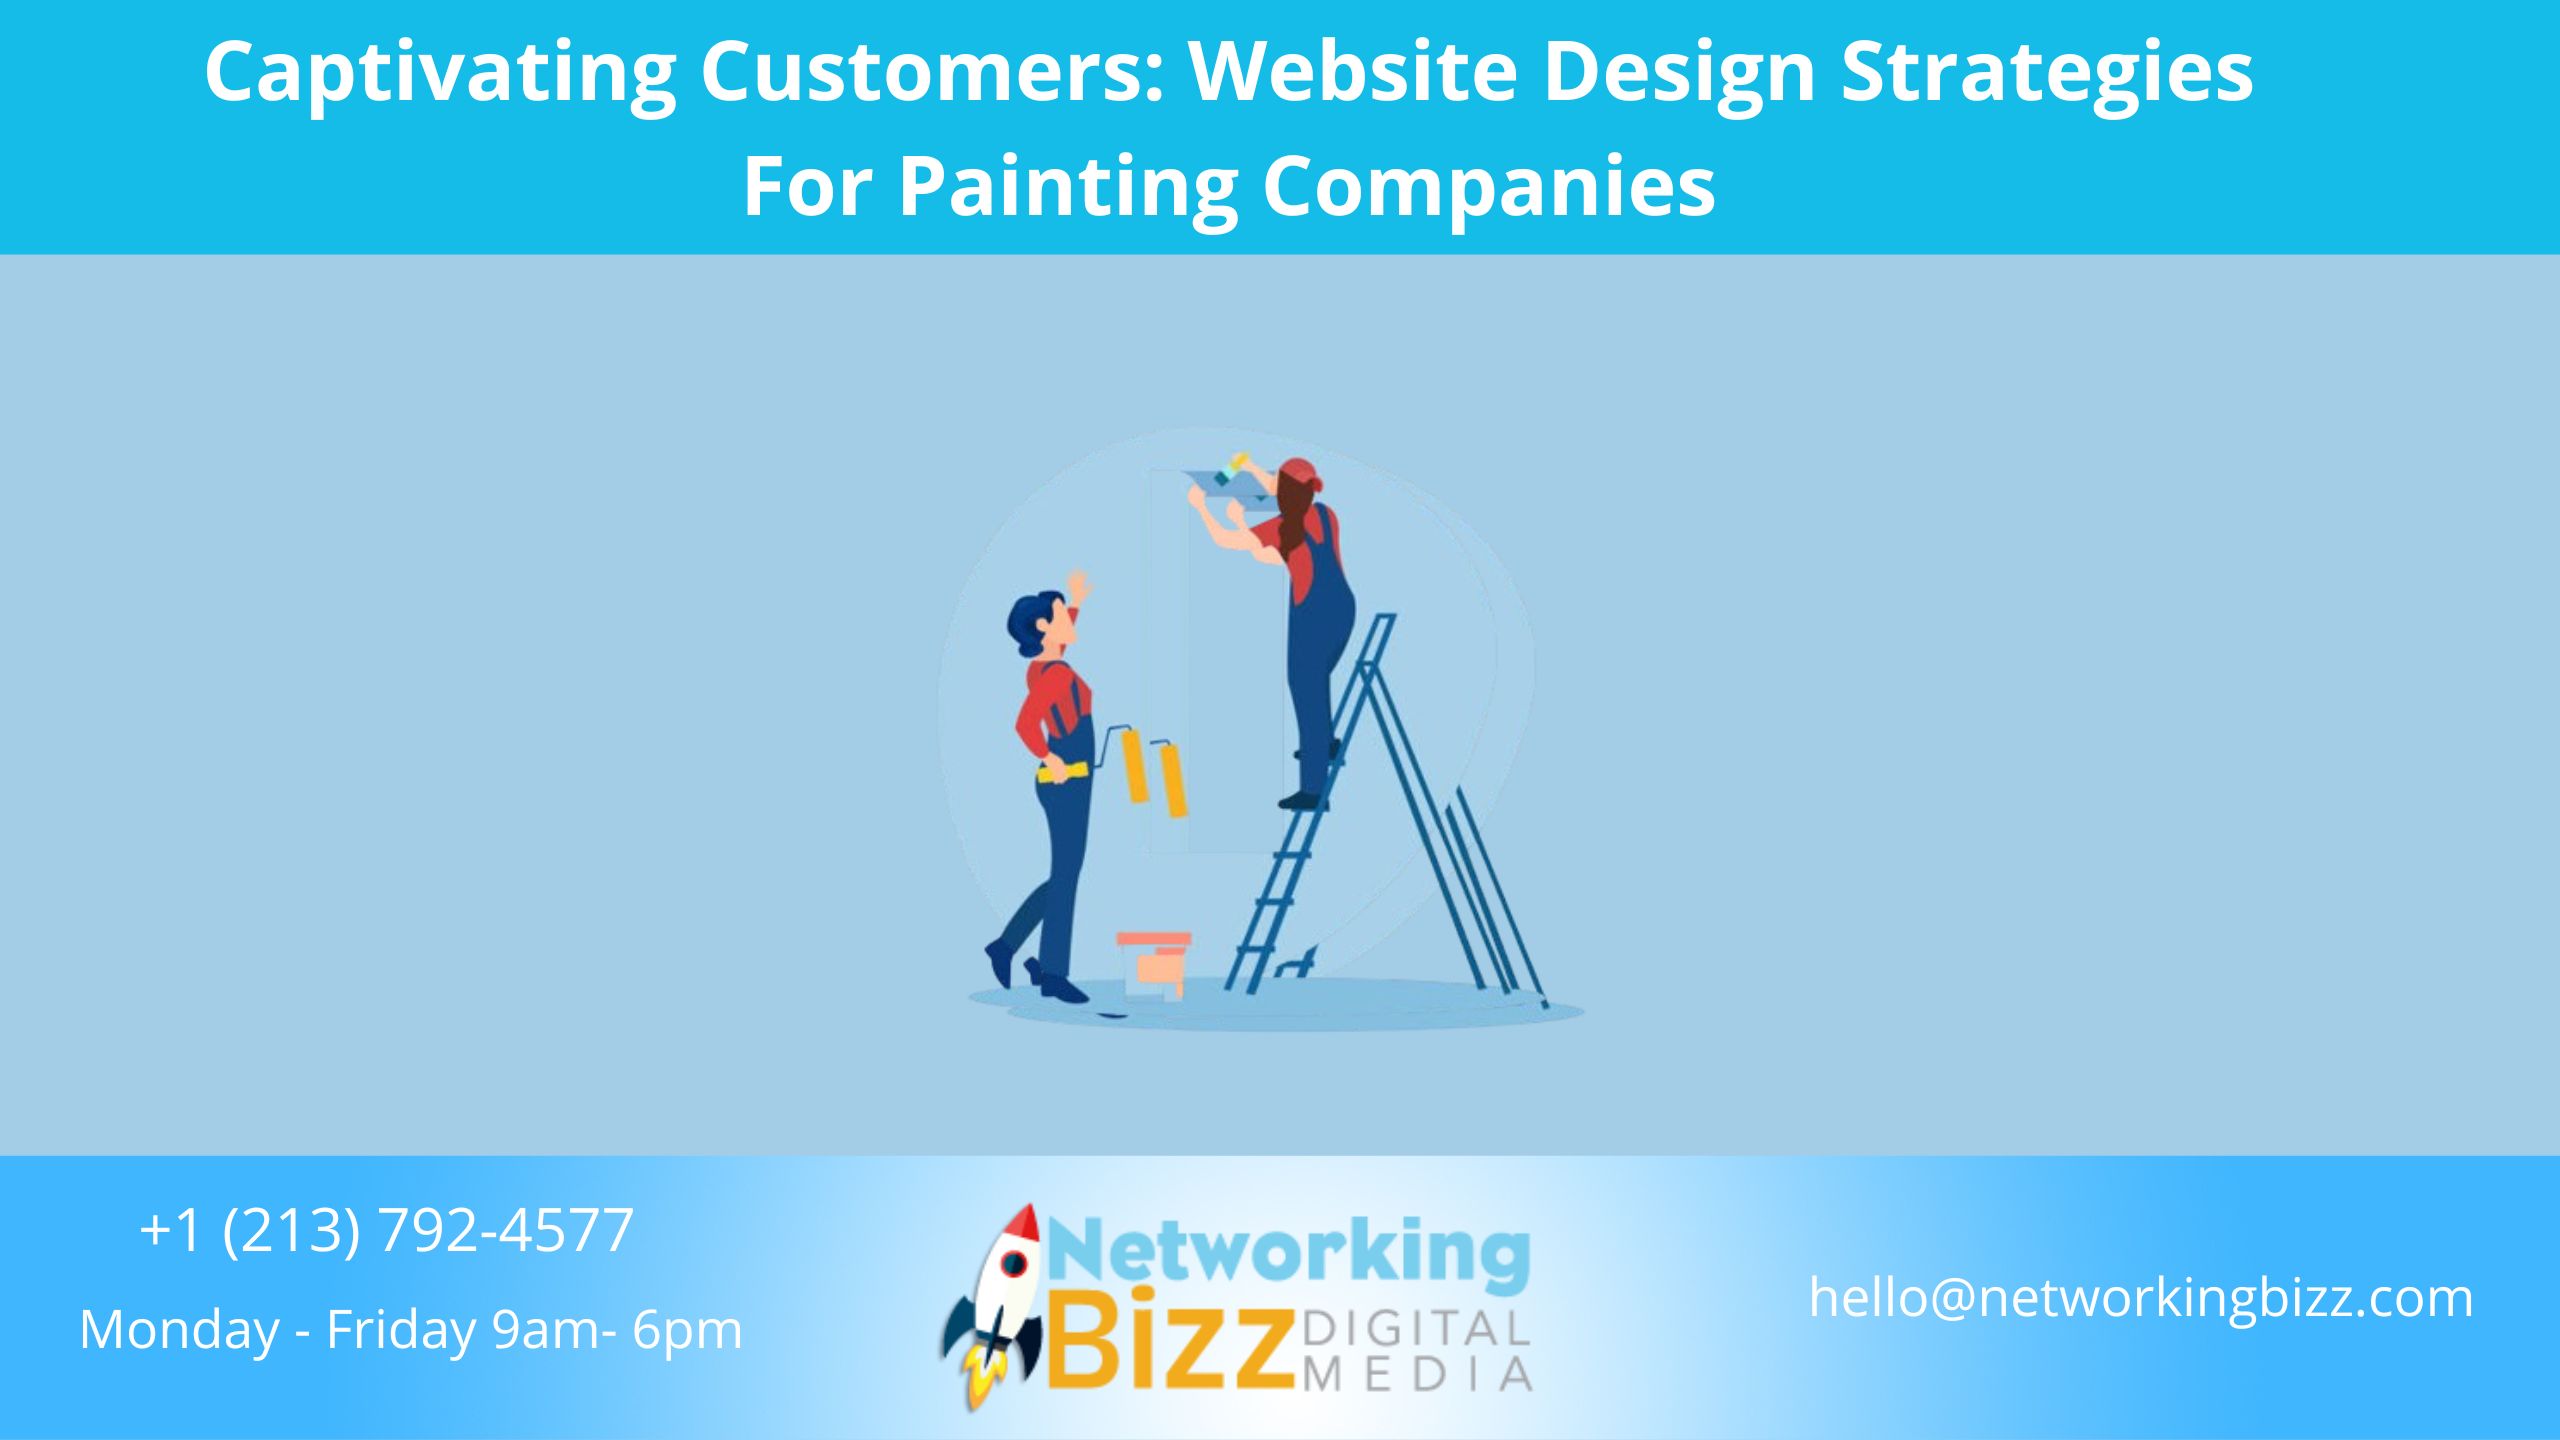 Captivating Customers: Website Design Strategies For Painting Companies